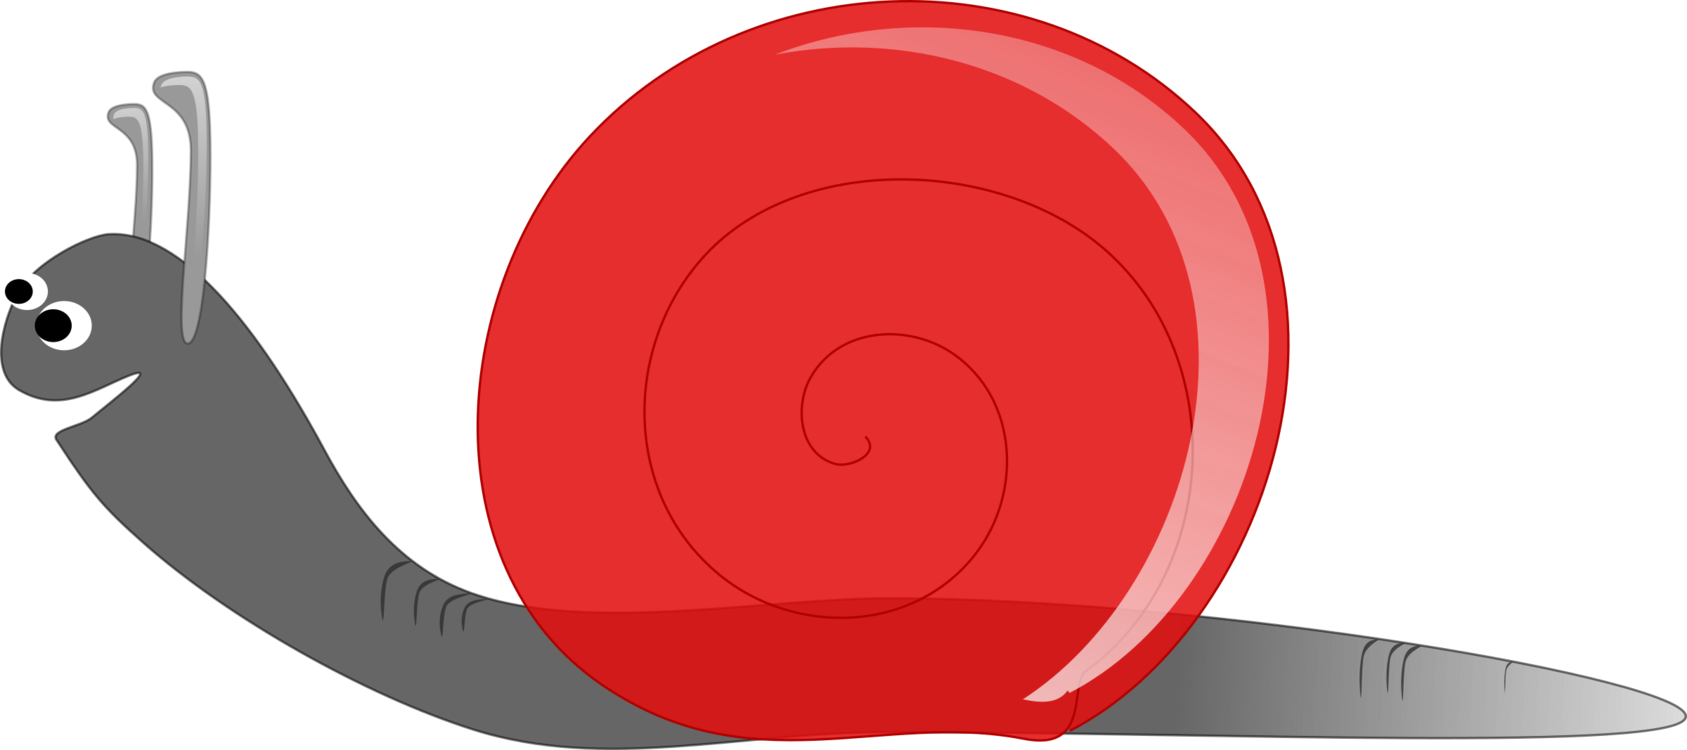 Technology,Red,Snail